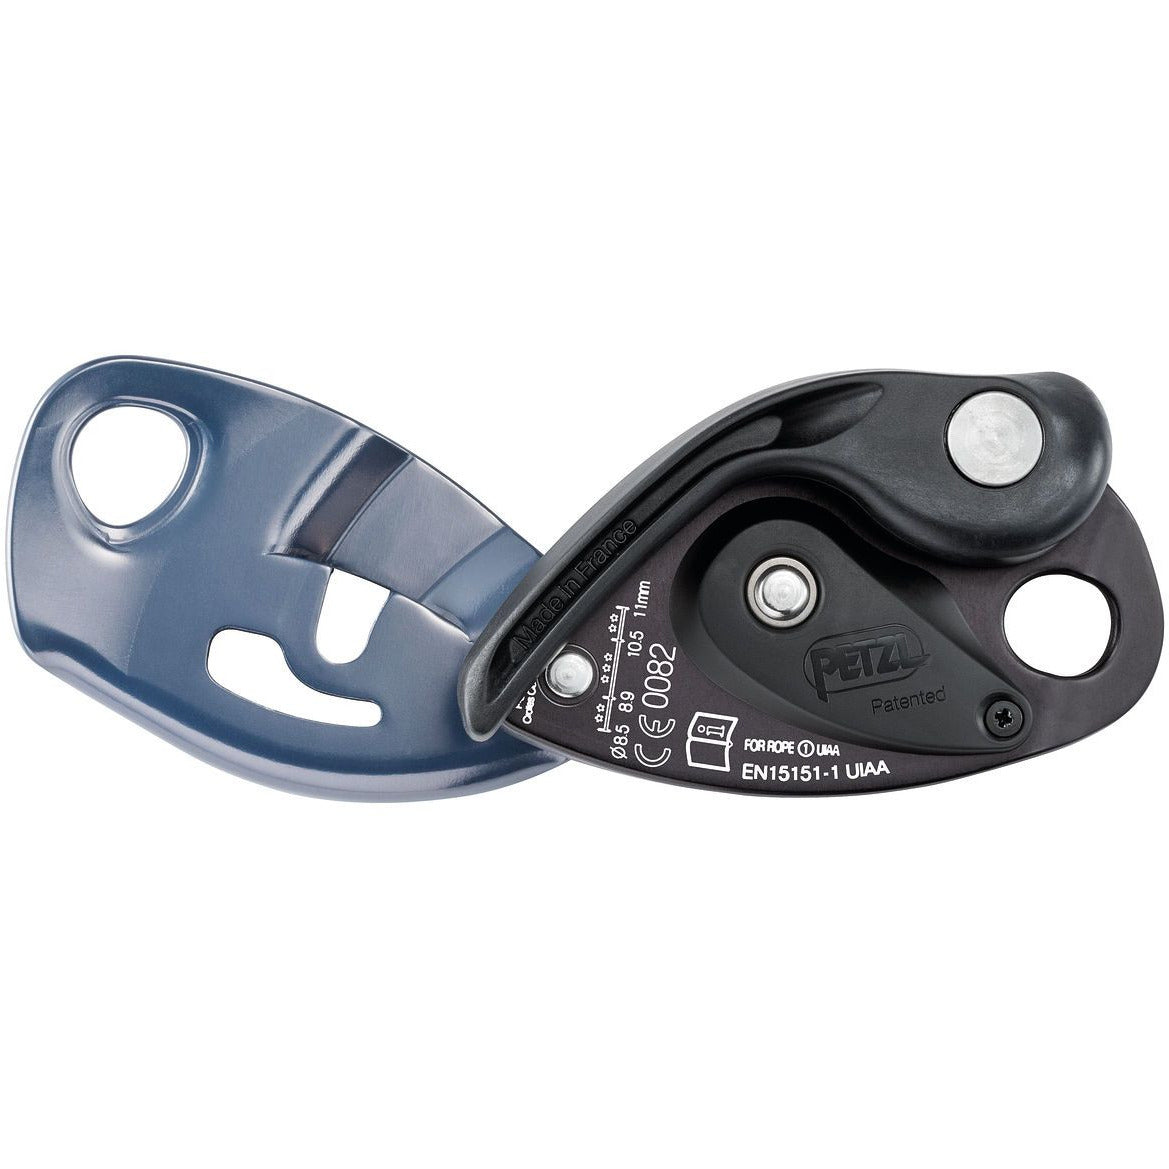 Petzl GriGri + — Adventure Experiences: A Full Service Challenge Course  Company